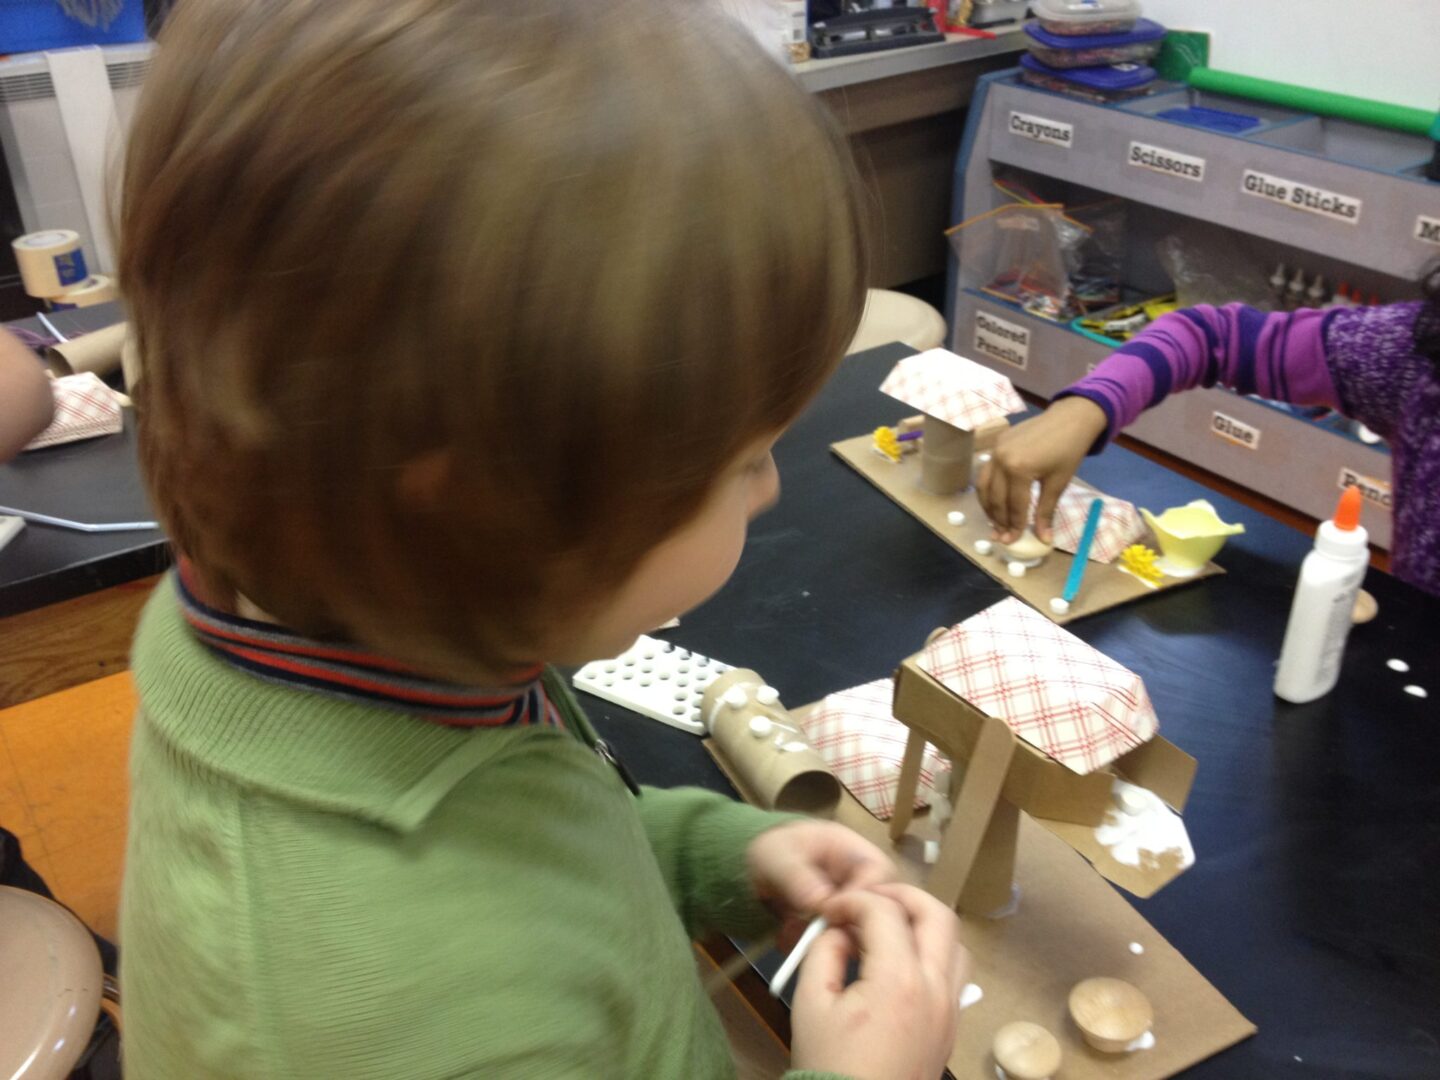 A young boy is making a paper model of a horse.